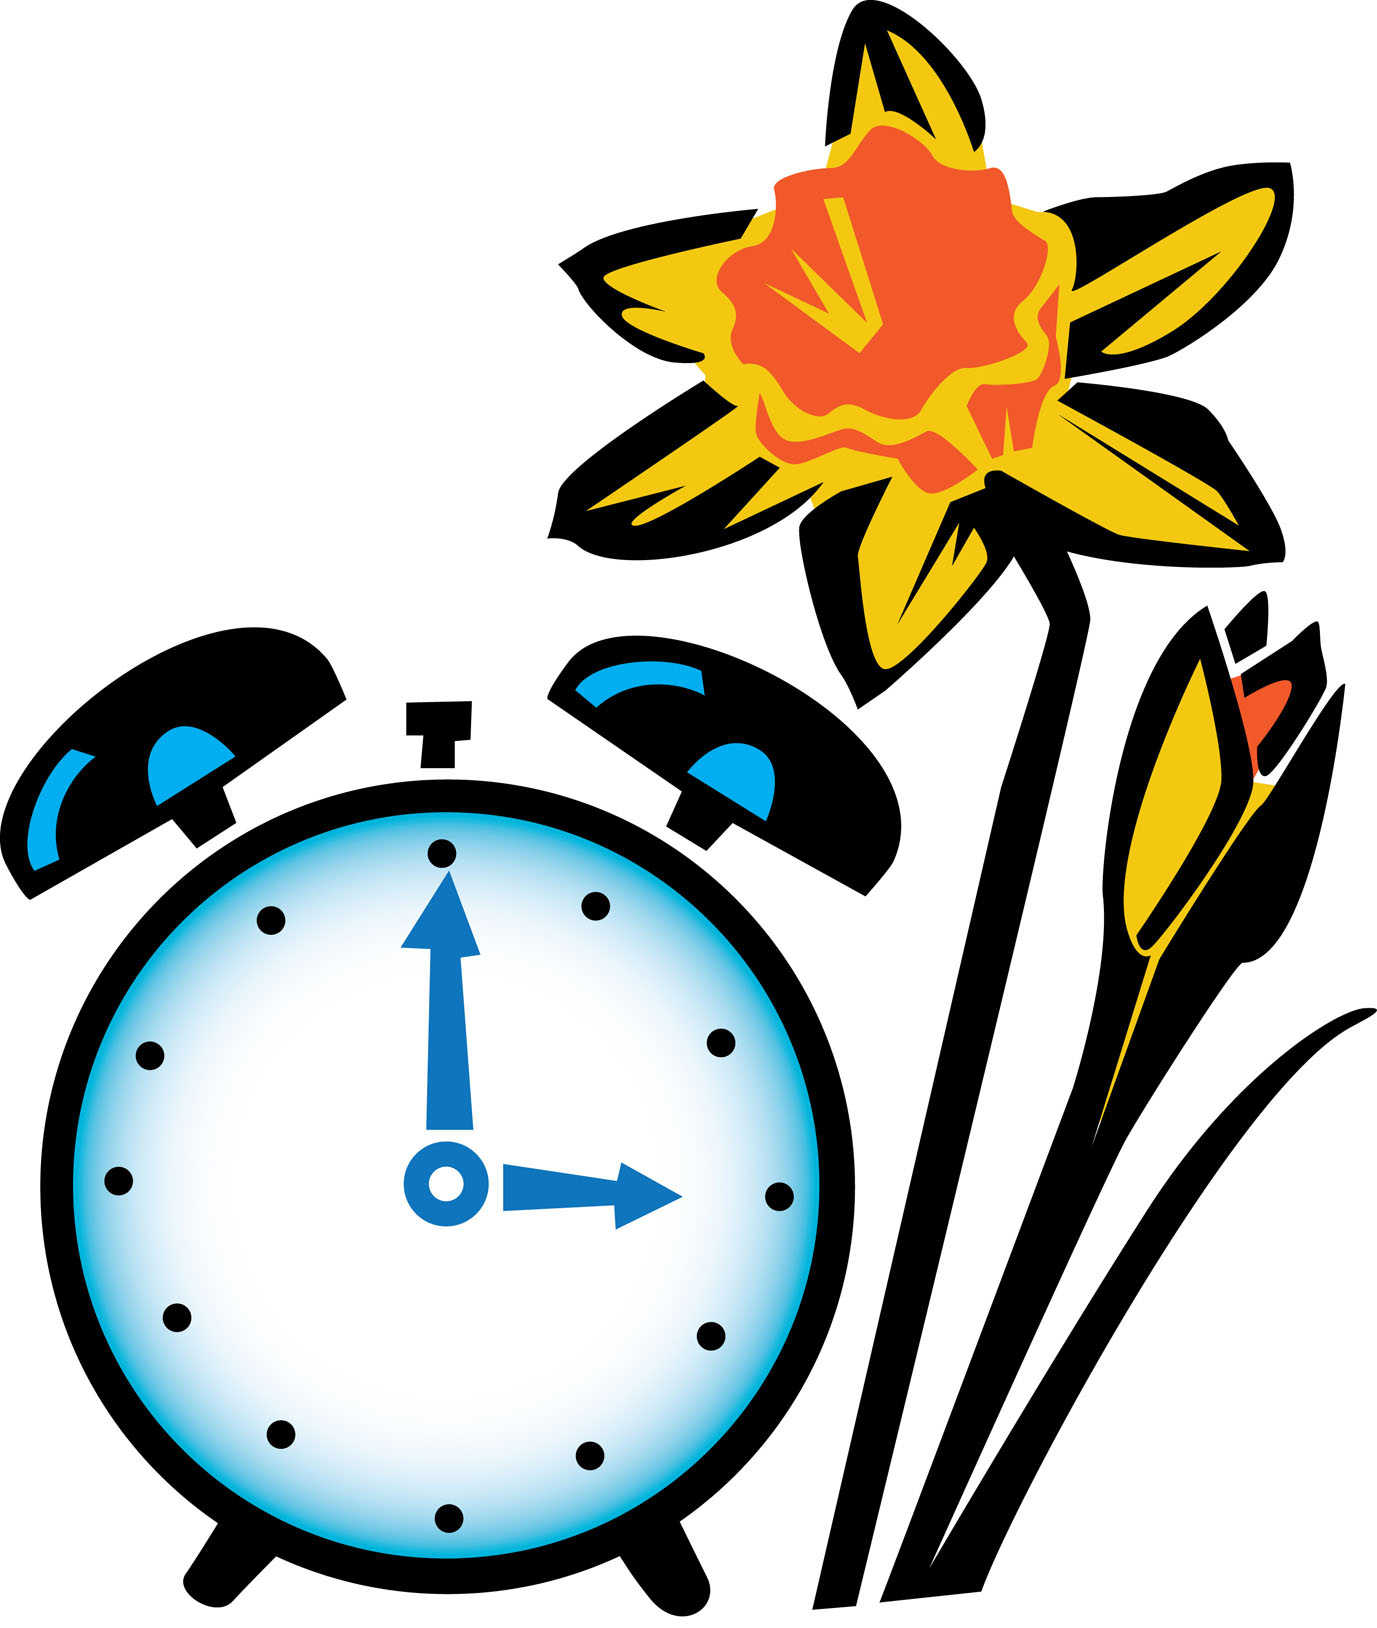 manual alarm clock with bells next to daffodils